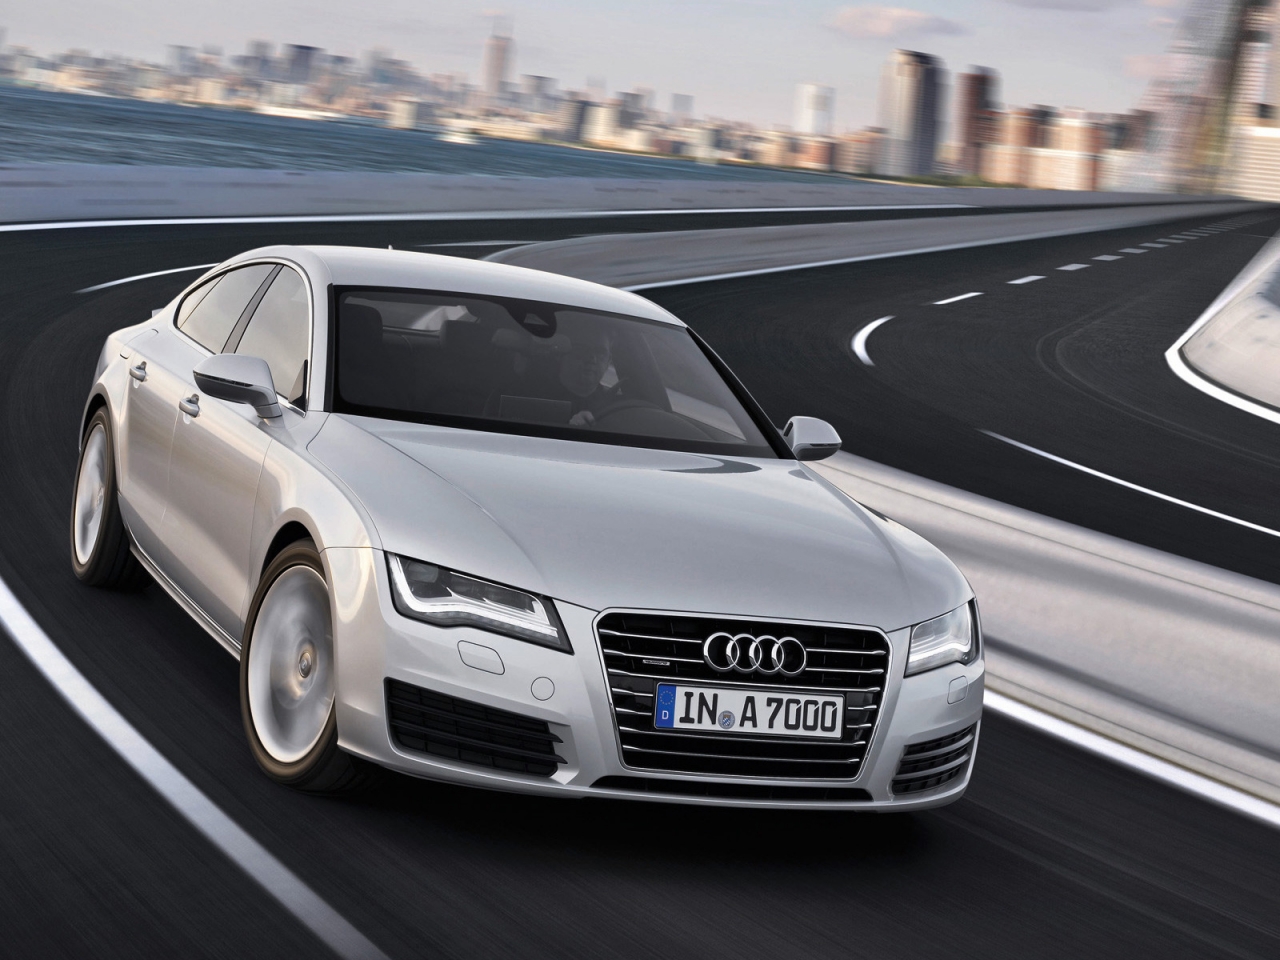 Audi A7 Sportback Speed for 1280 x 960 resolution